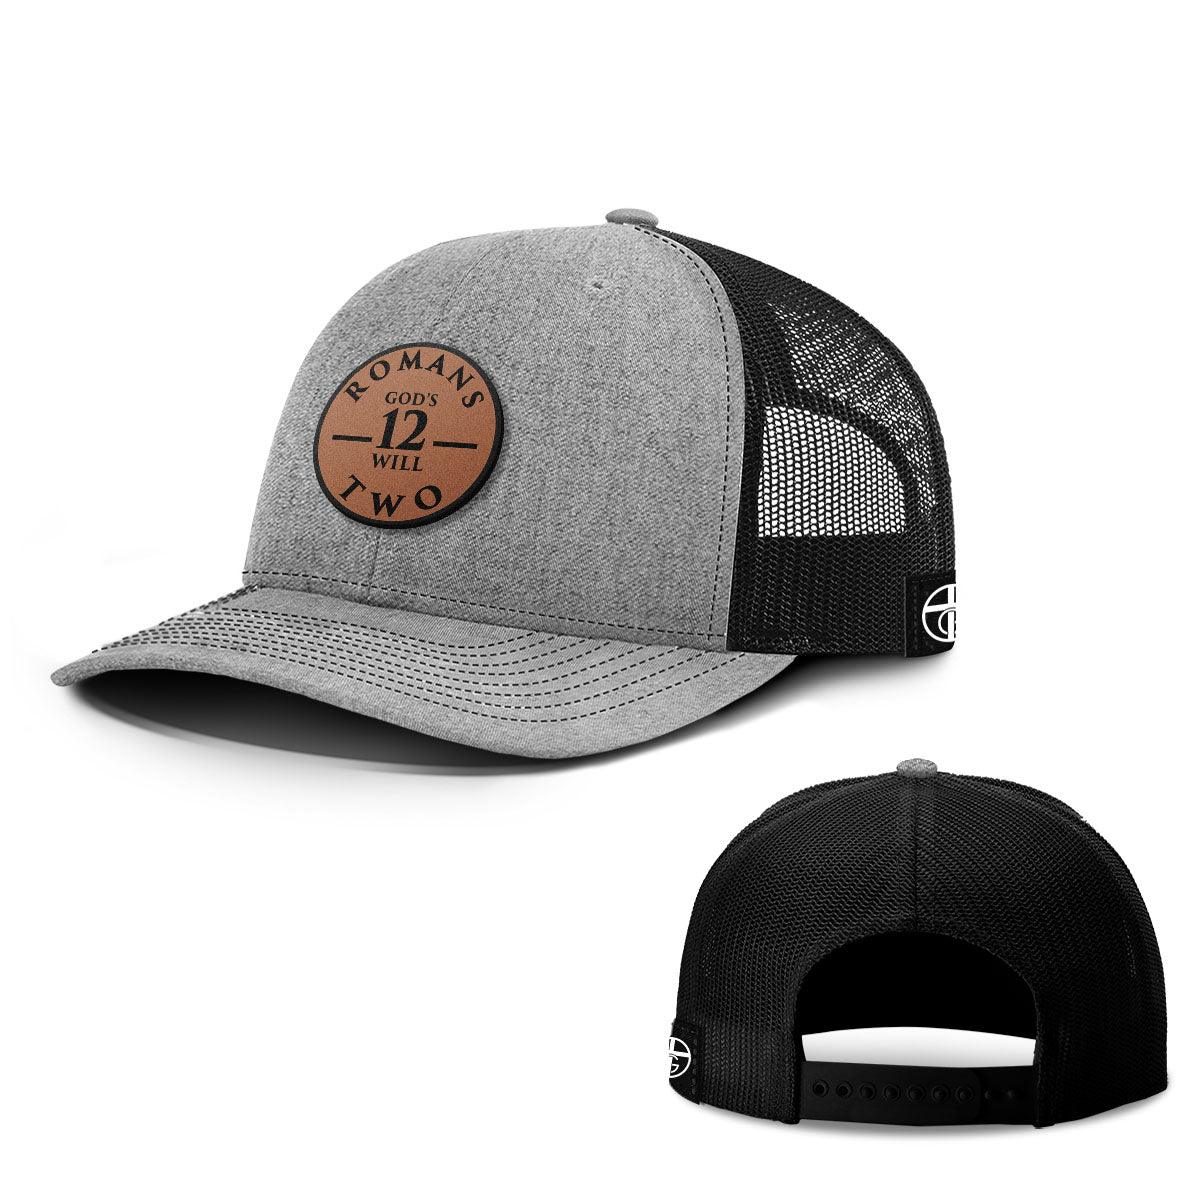 Romans 12 Two Leather Patch Hats